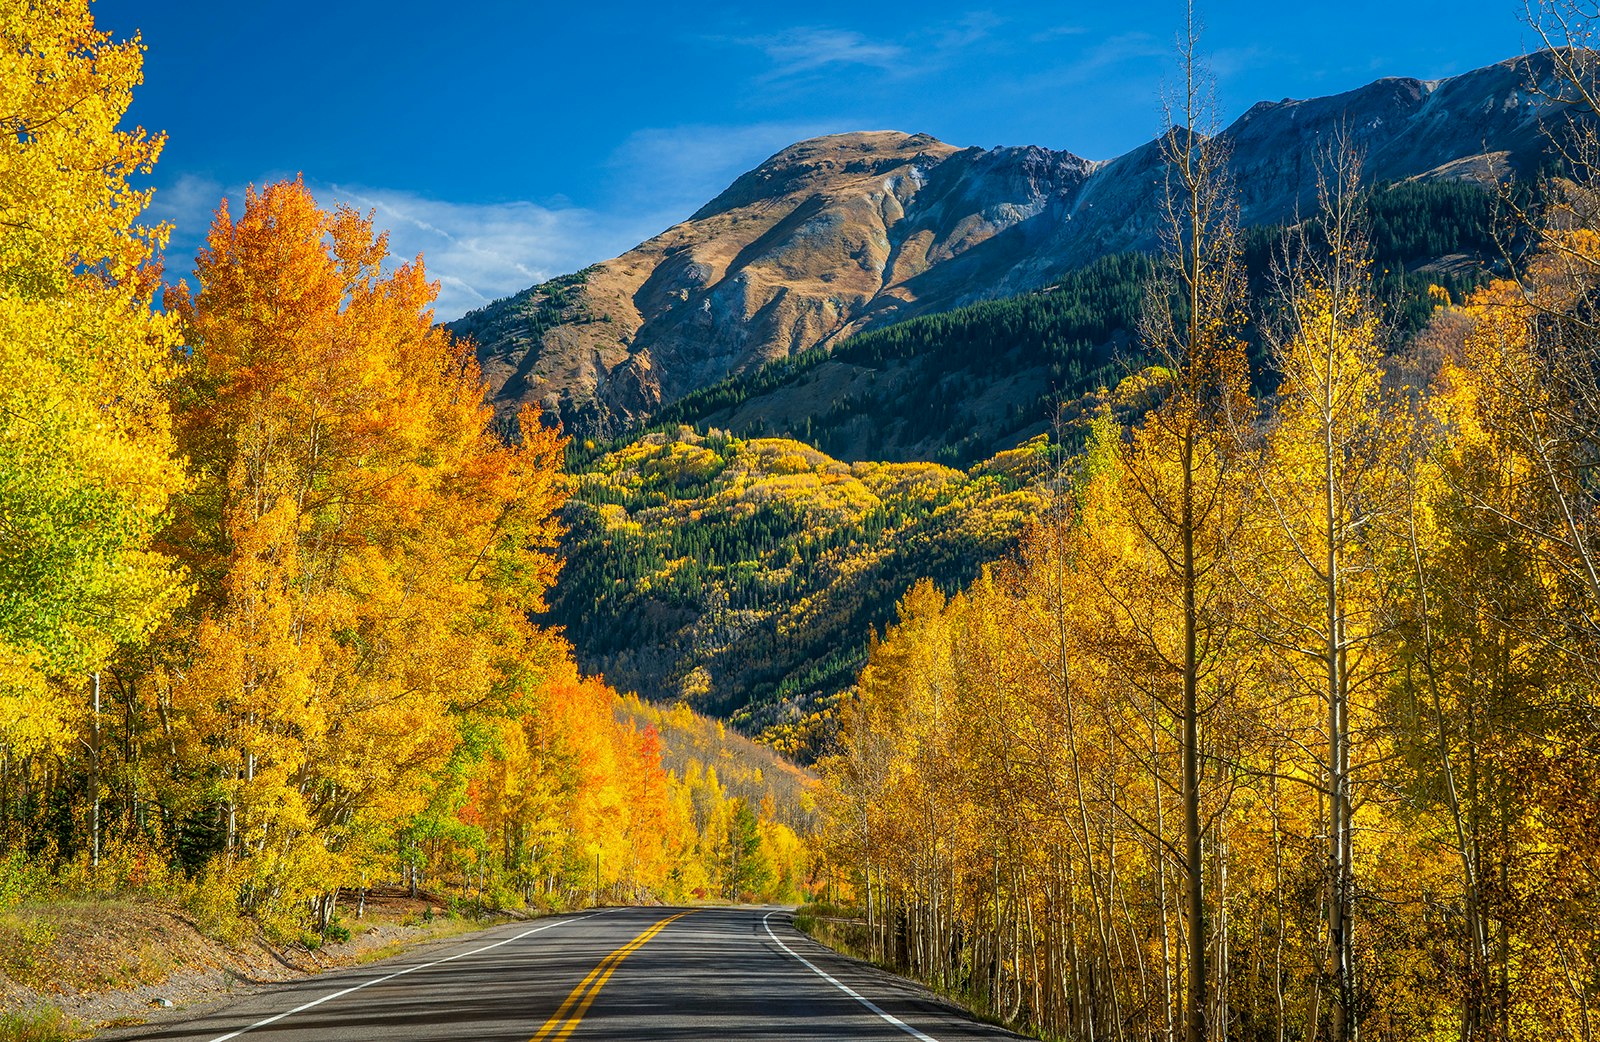 Western US road trip - A road extends into an autumnal tree line towards bluffs in the Rocky Mountains. Colorado, USA.